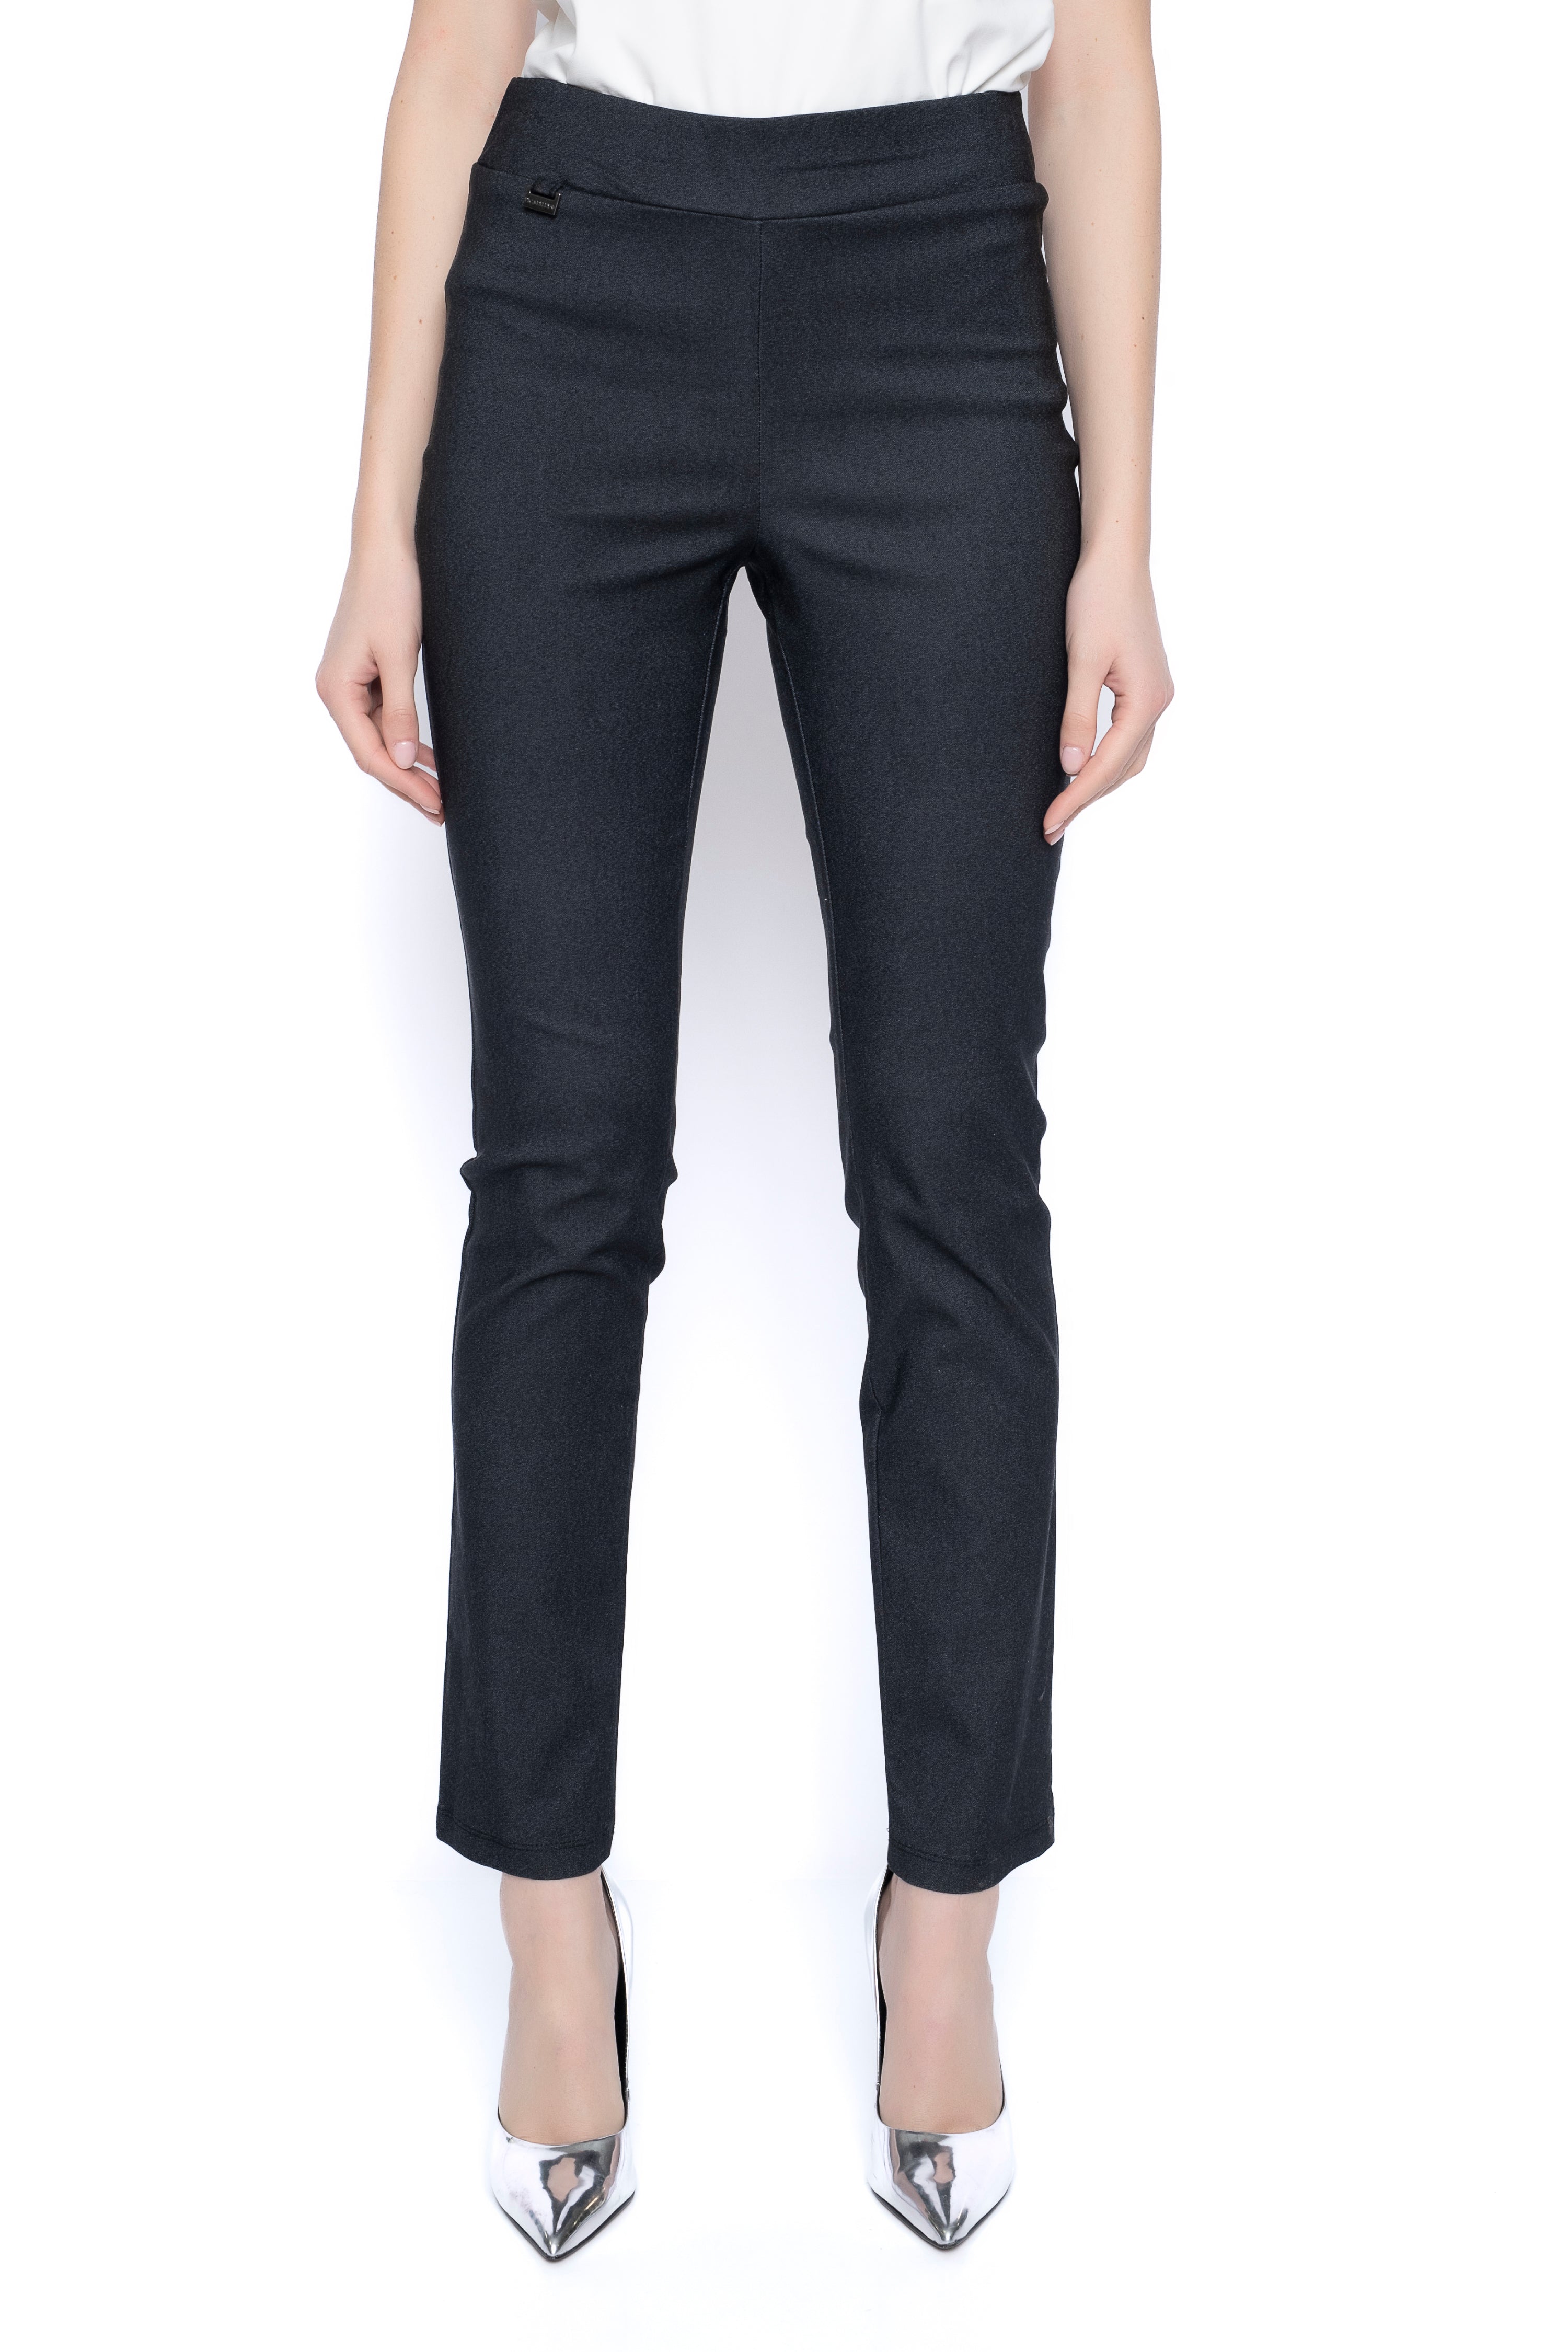 Pull-On Straight Leg Pant Petite Size, Picadilly Canada